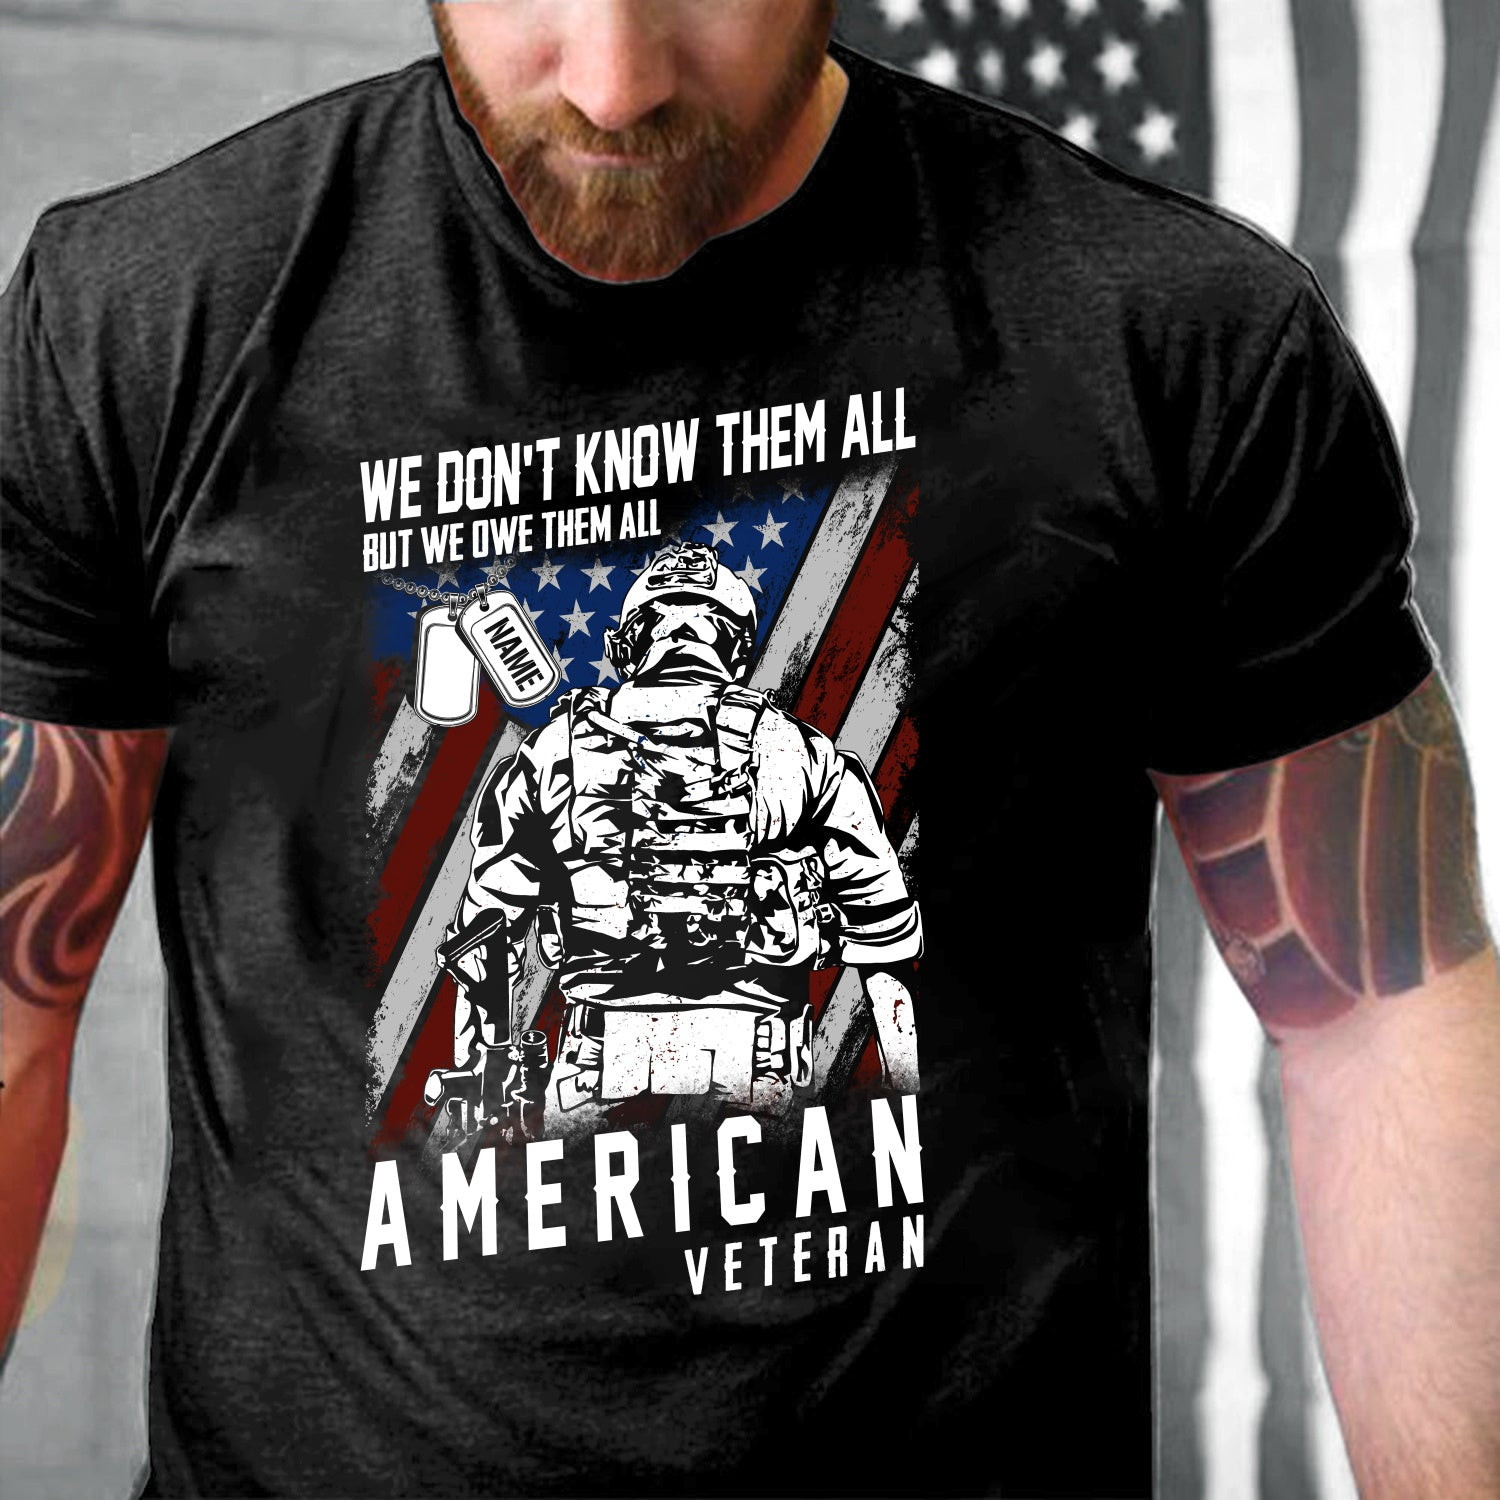 Veteran Custom Shirt, We Don't Know Them All But We Owe Them All Personalized Gift T-Shirt KM2203